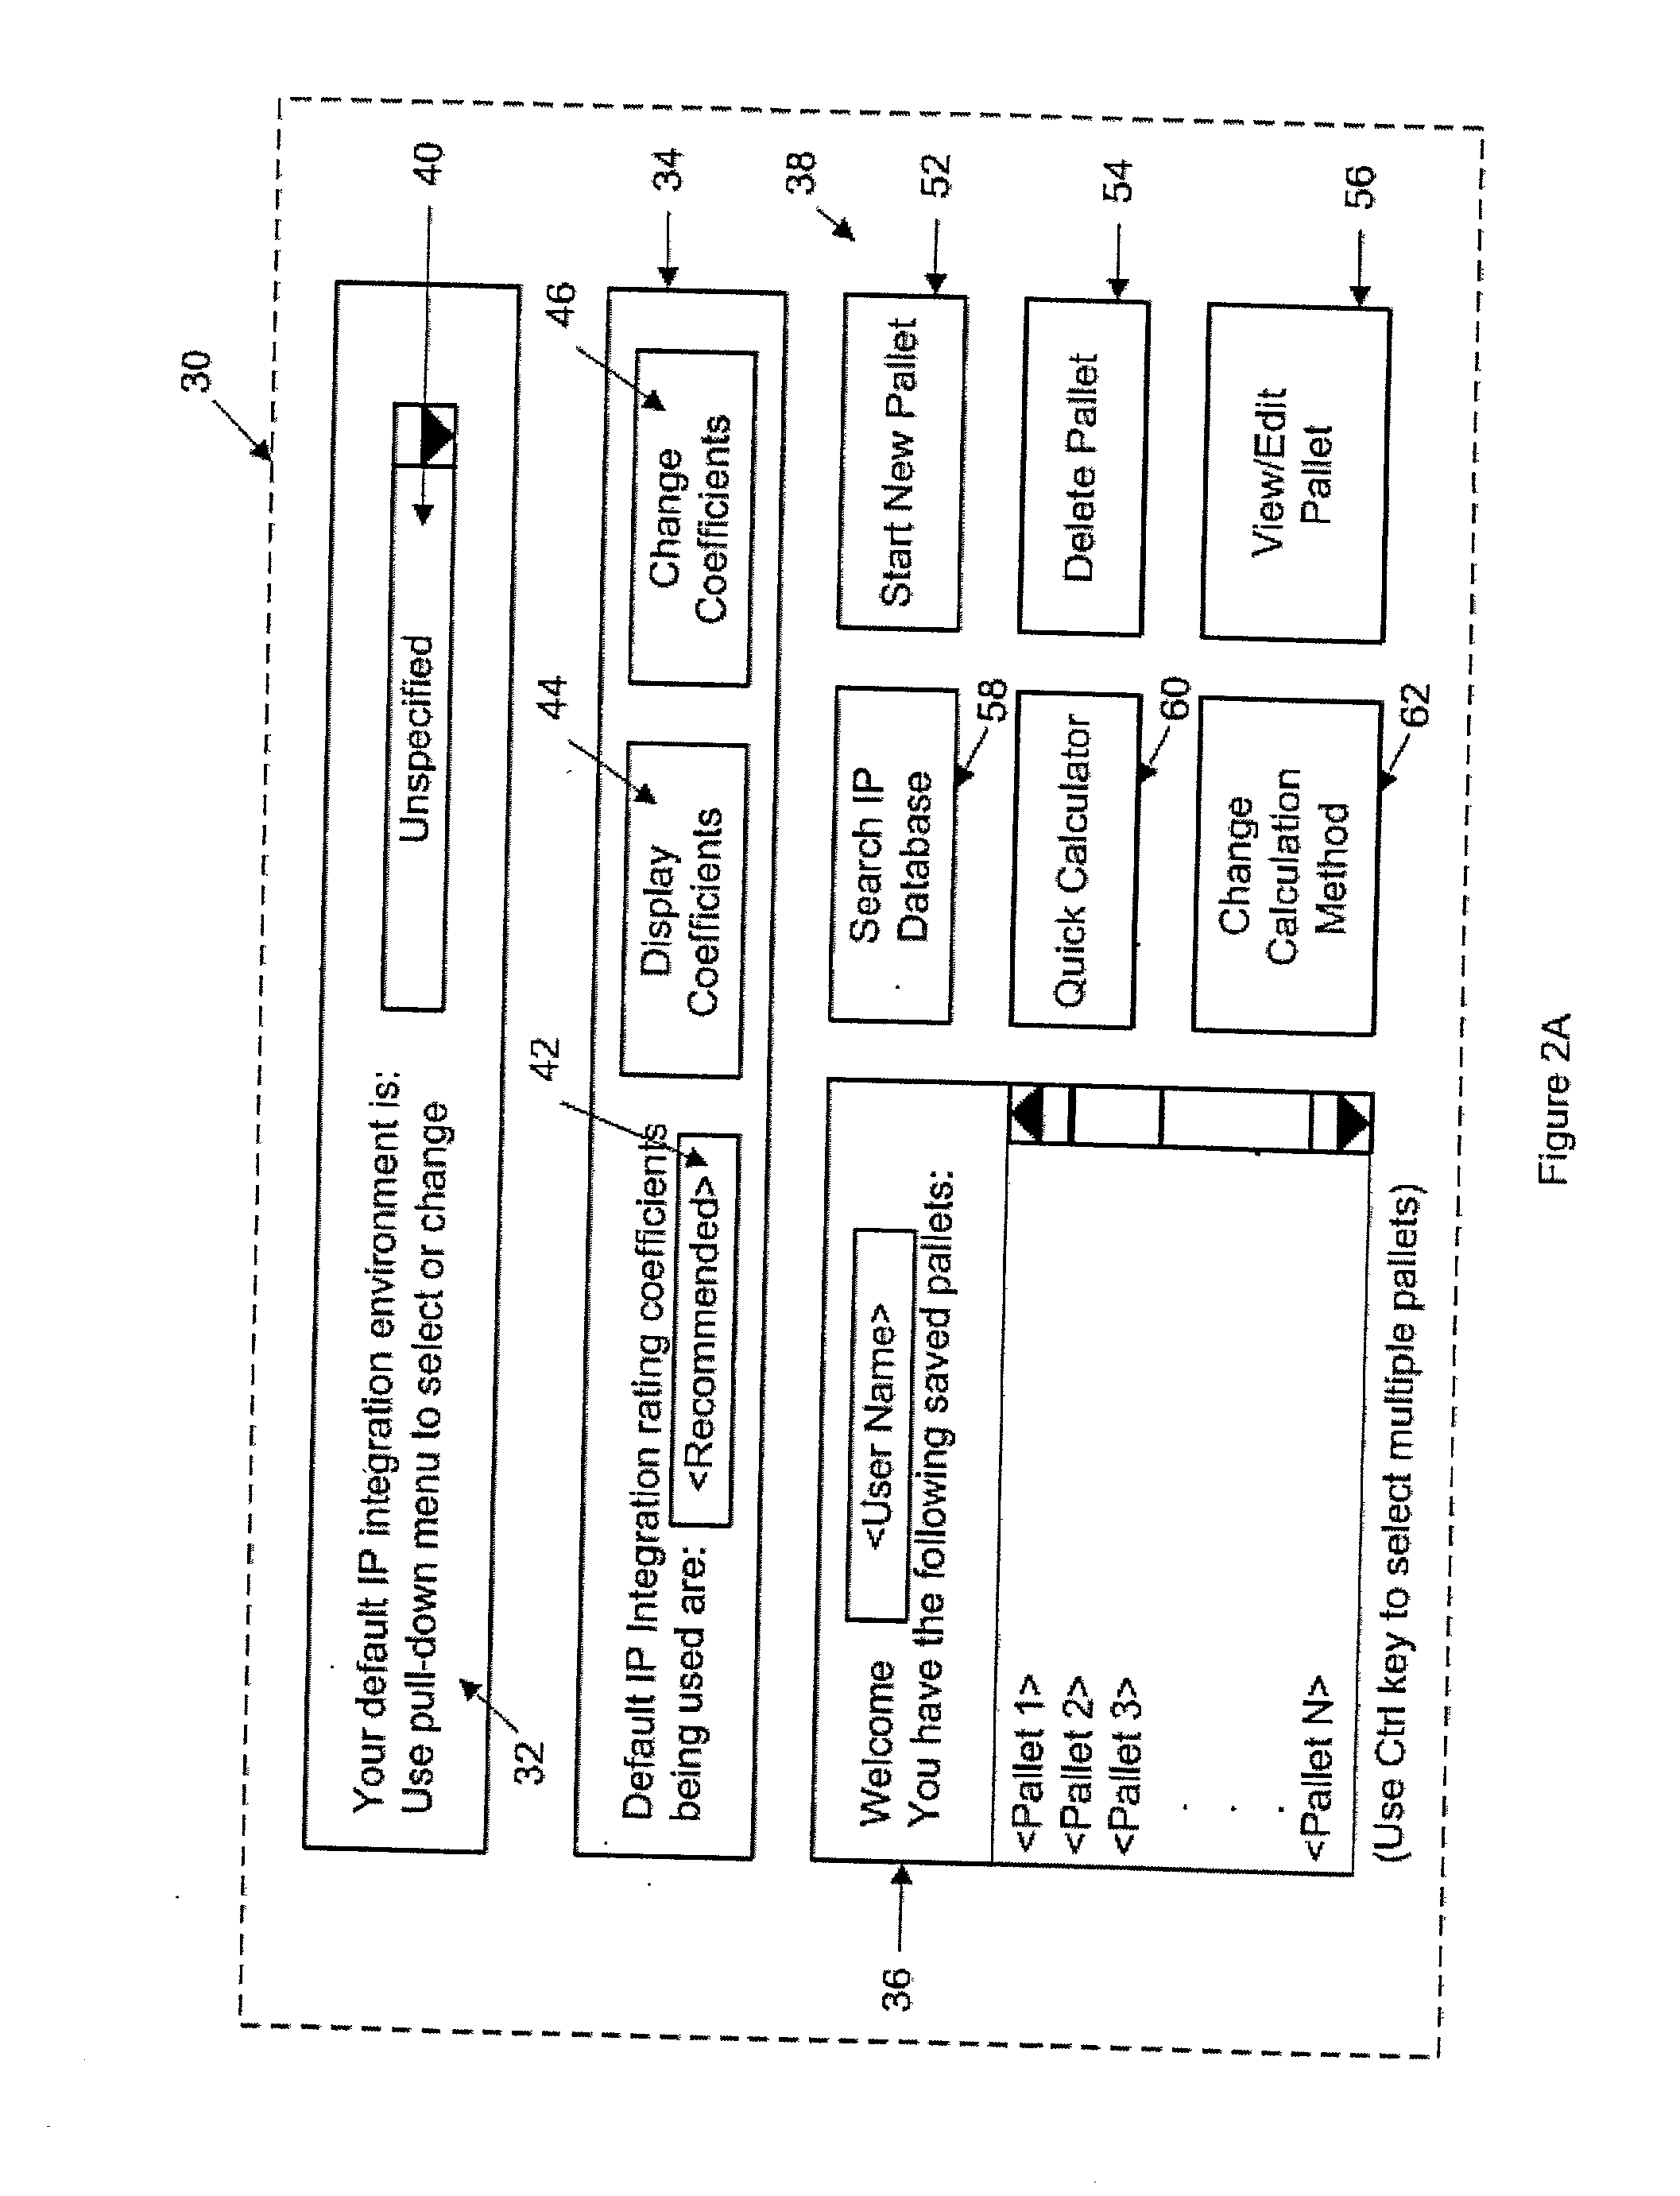 Apparatus and method for optimal selection of IP modules for design integration